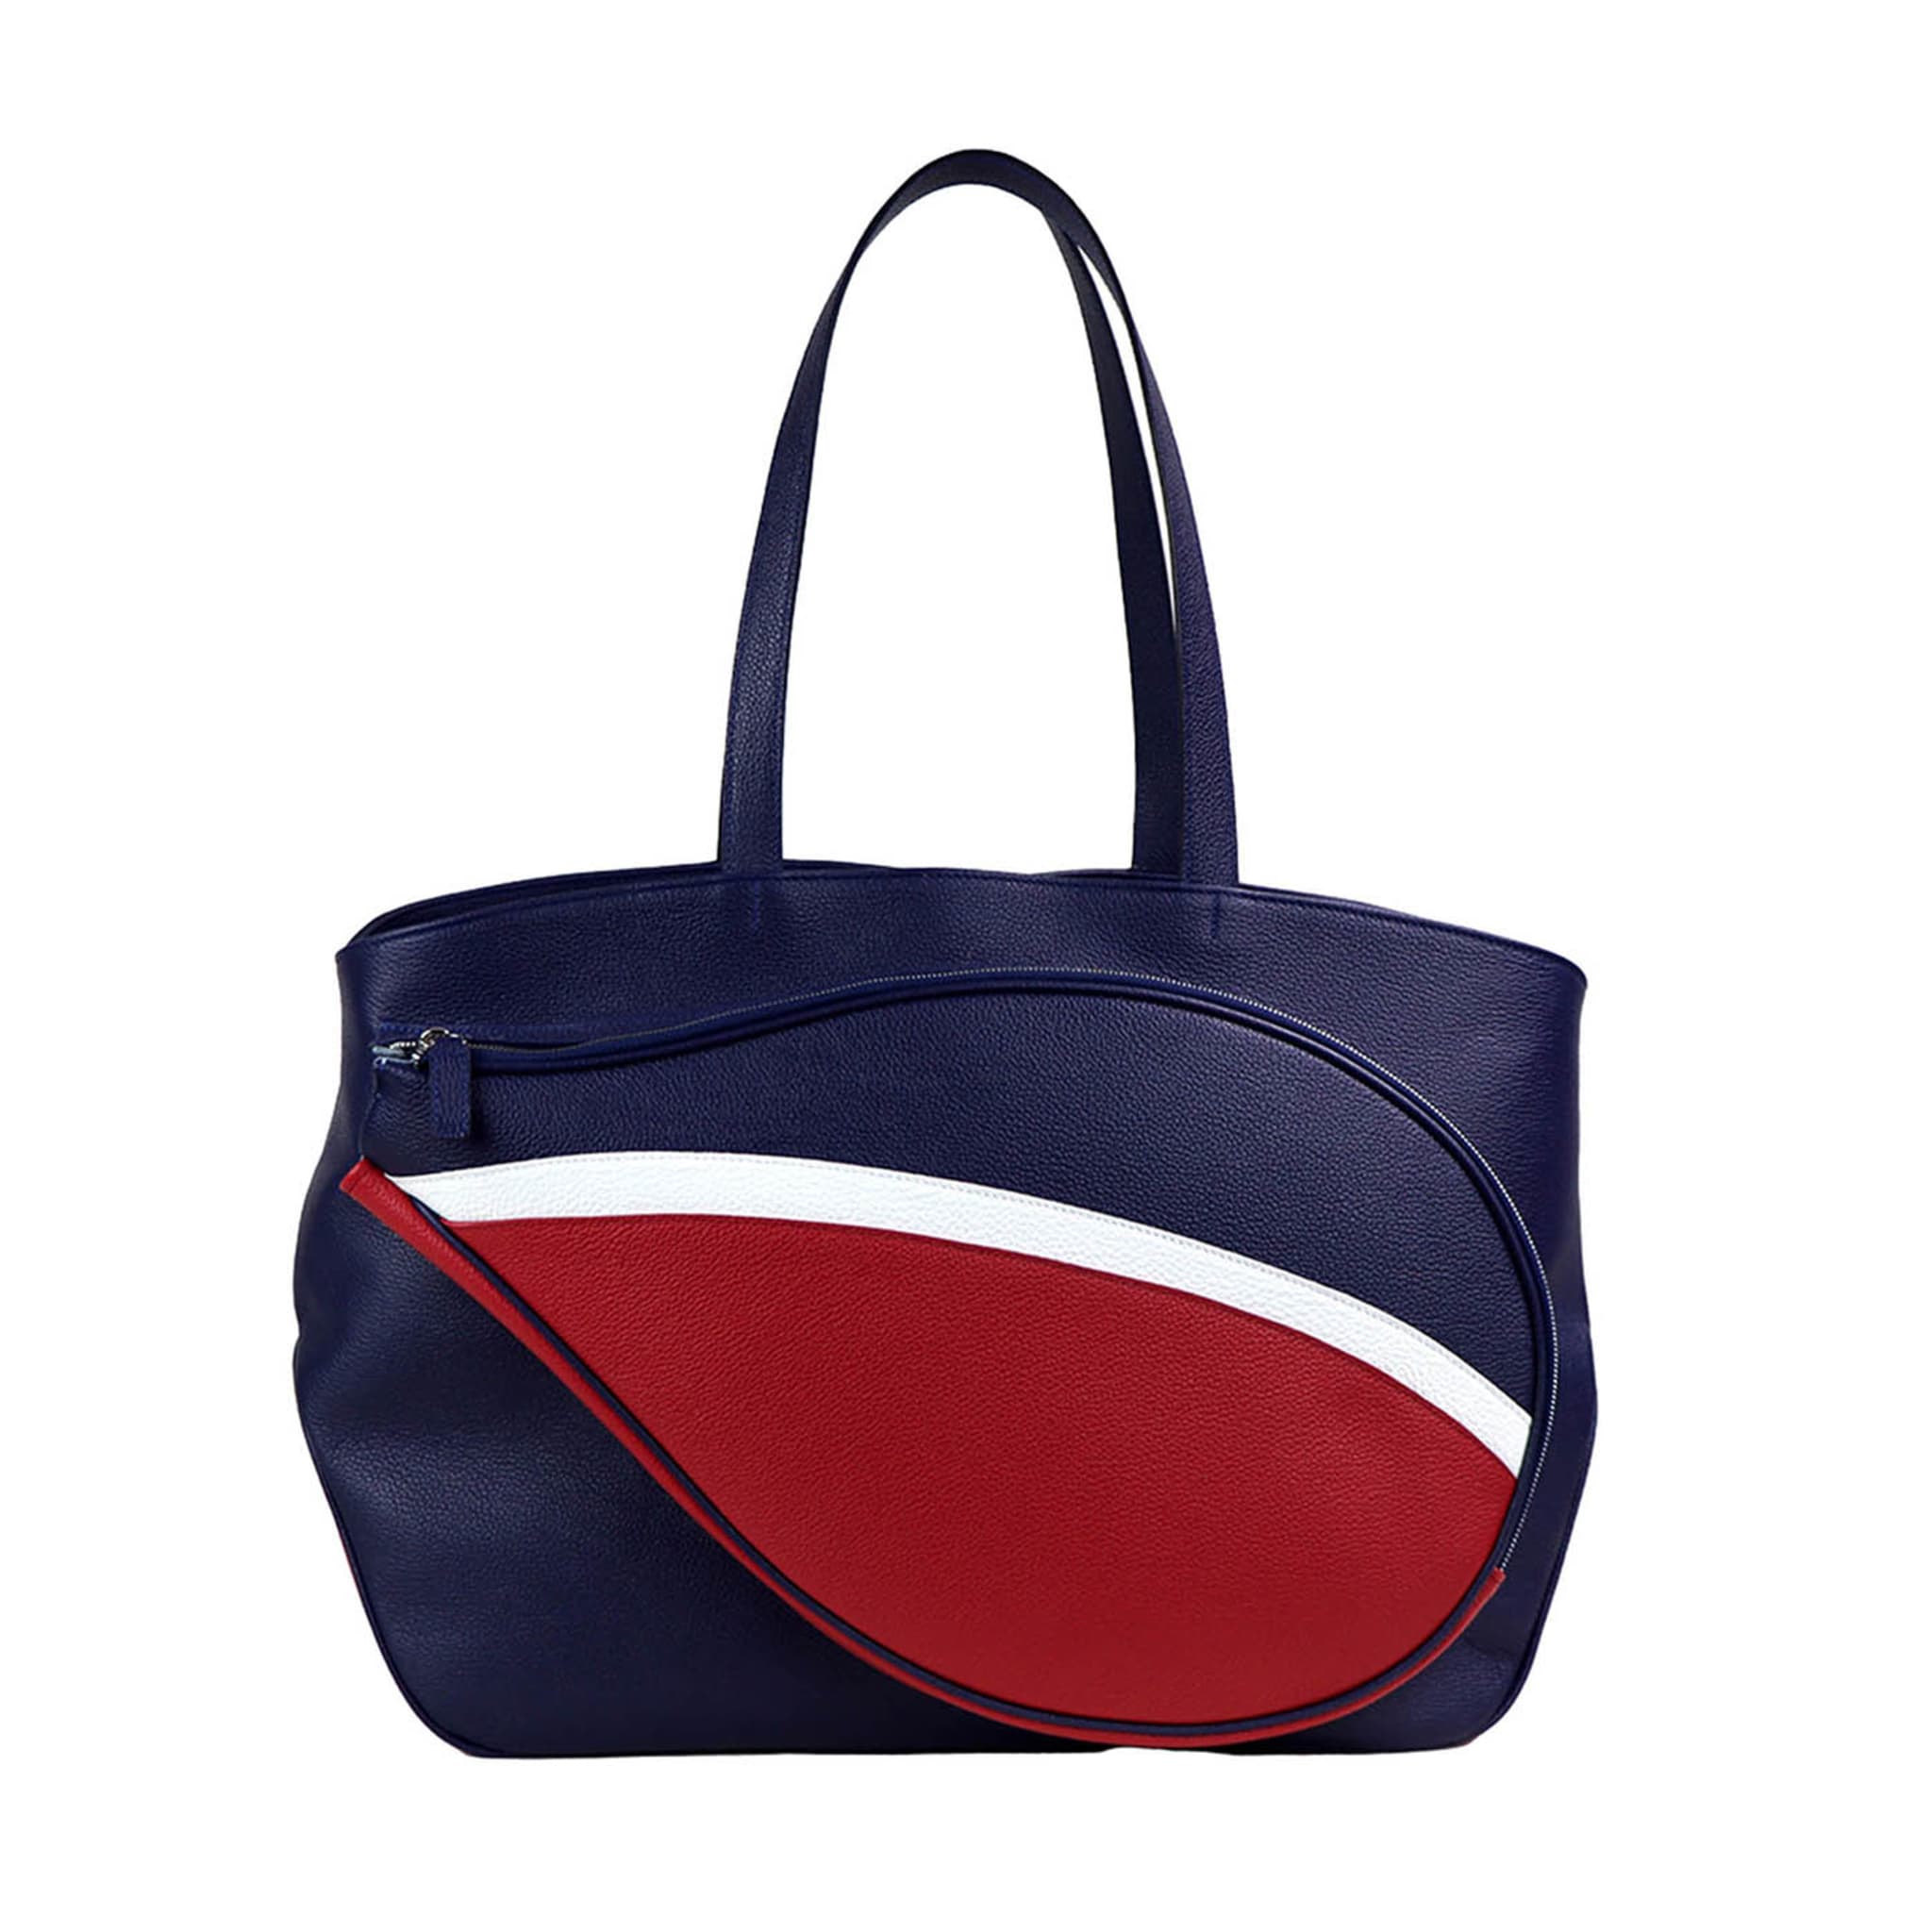 Sport Blue & Red Bag with Tennis-Racket-Shaped Pocket - Main view